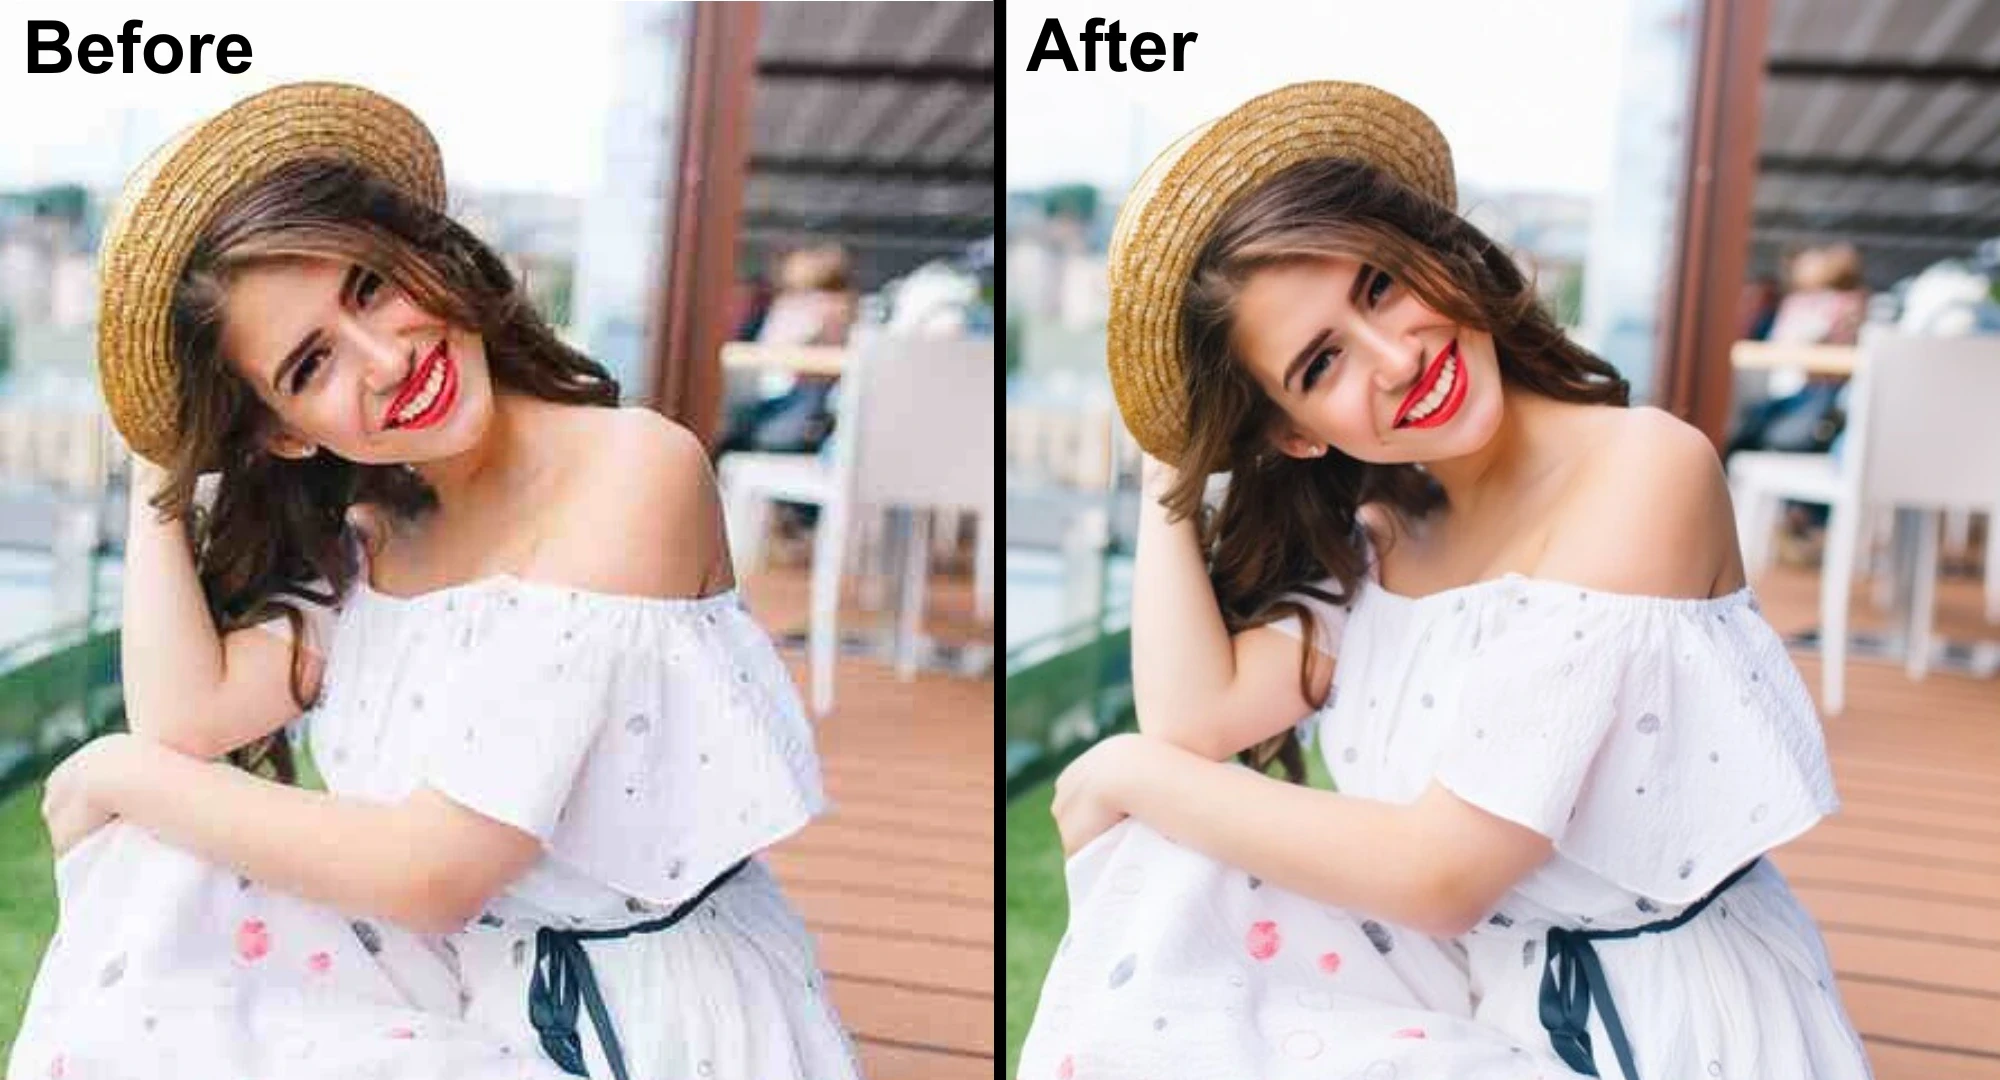 How To Use AI For Image Editing And Image Enhancing? A Detailed Guide!